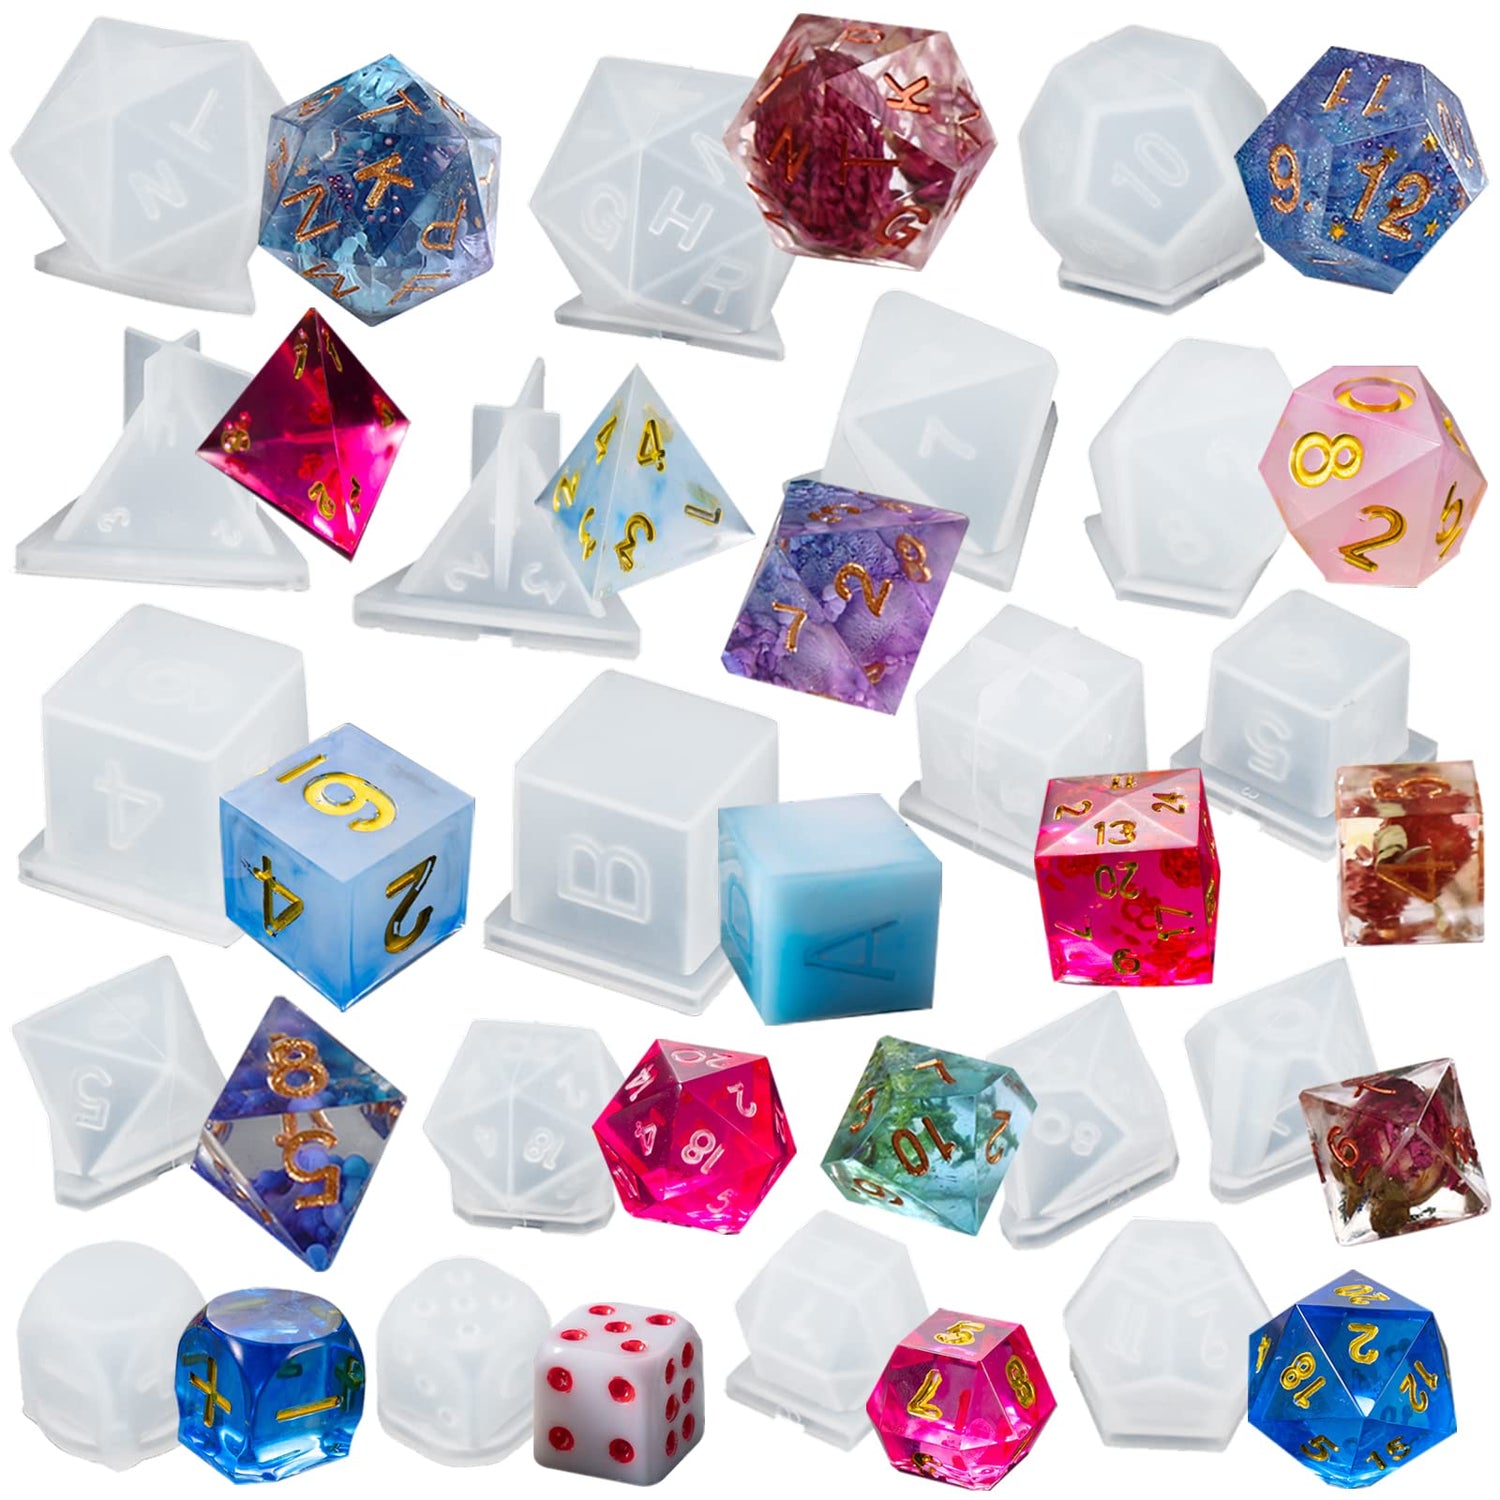  2pcs Dice Mold Dice Making Starter Kit Polyhedral Dice Game  Molds Epoxy Dice Kit Epoxy Casting Kit Bejeweled Kit Epoxy Mold for Dice  Silica Gel White Letter Crafting Supplies : Arts